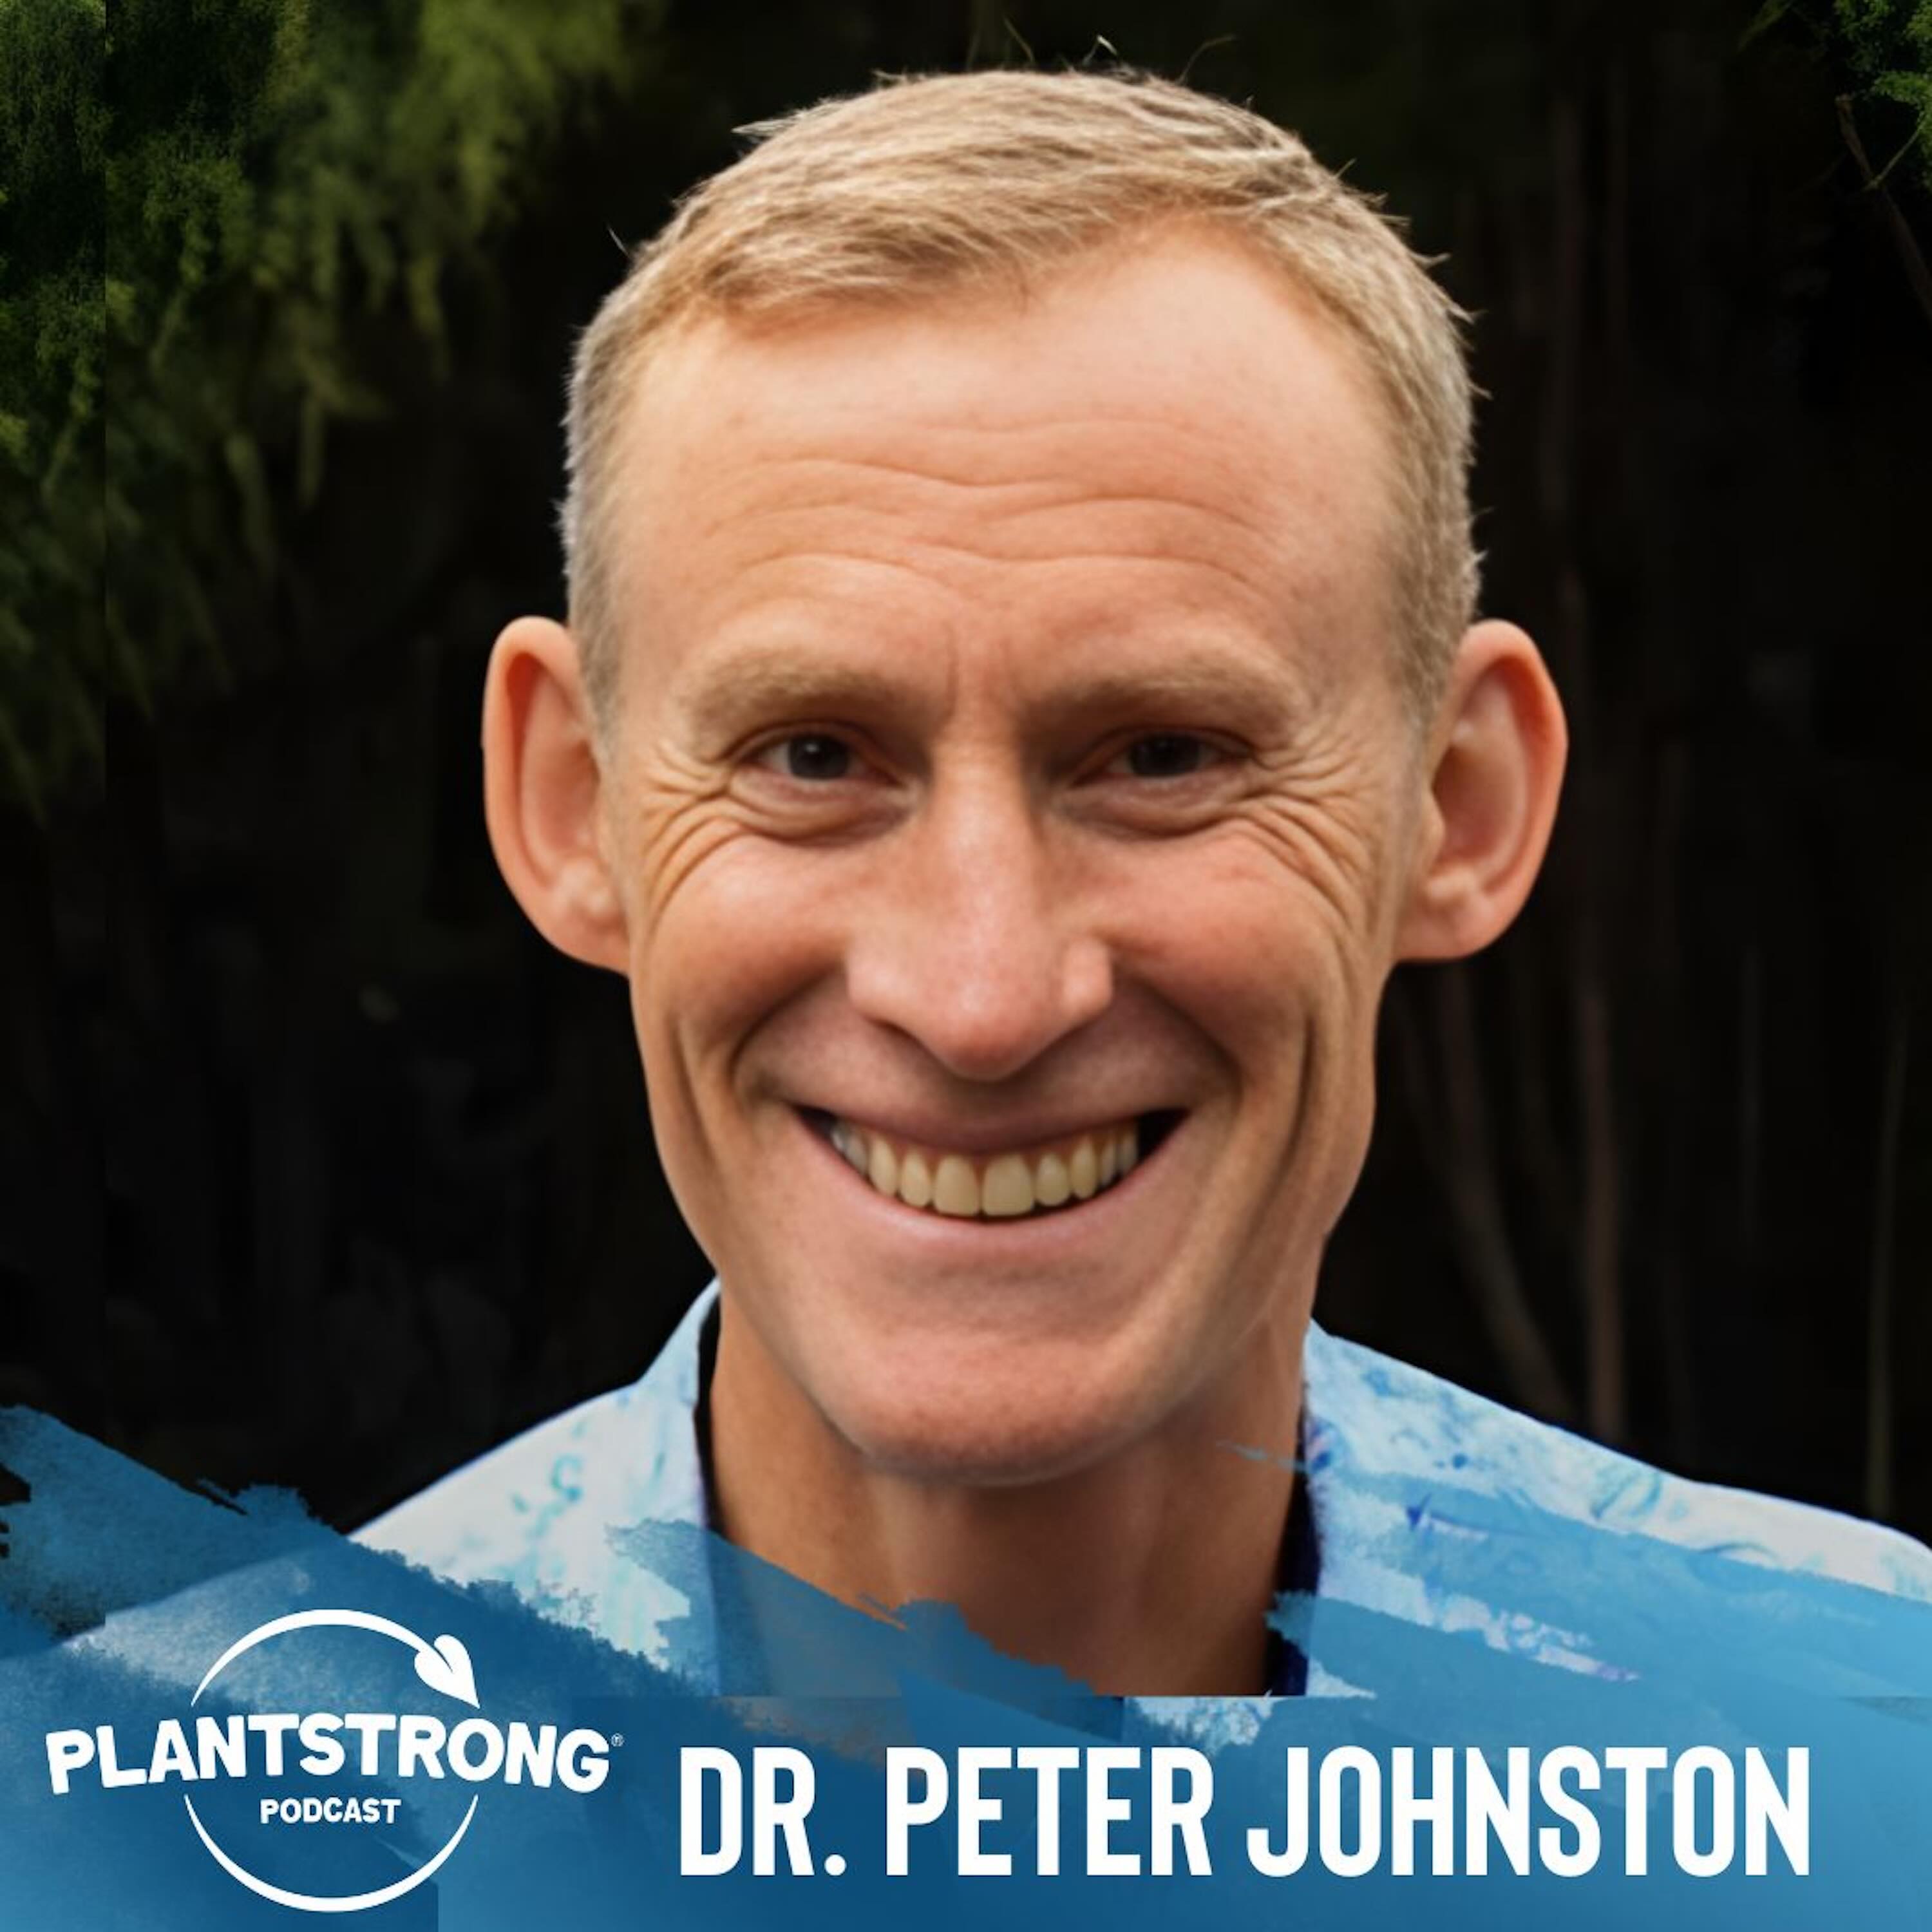 Ep. 246: Dr. Peter Johnston - The Single Biggest Way to Reduce Your Impact on Mother Earth